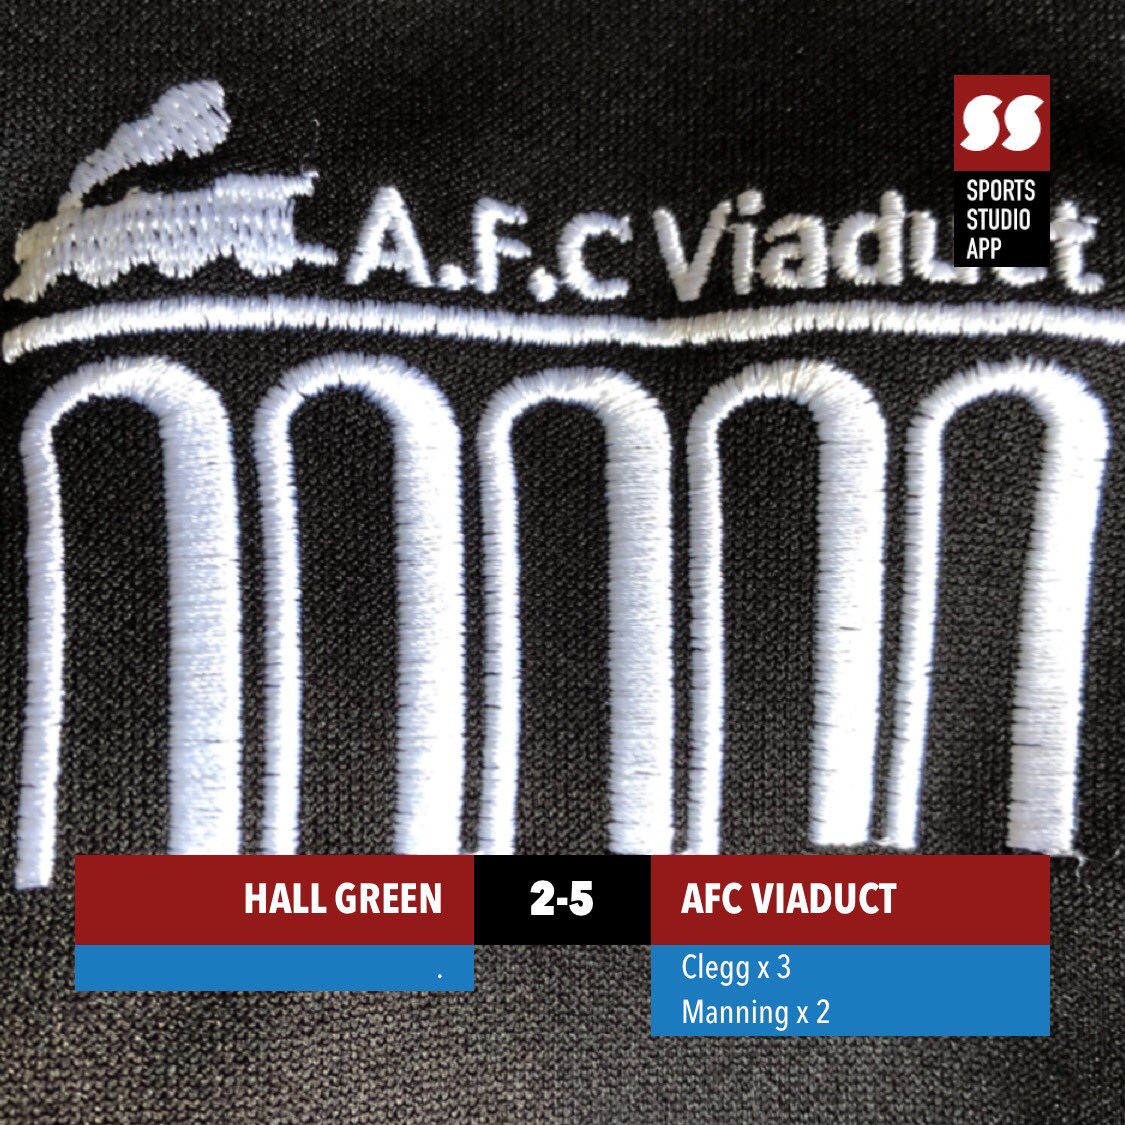 Great performance from the lads first game of the season vs @HallGreen_Utd. MOTM @JoeClegg44 and their RB who was at fault for most of our goals. Looking forward to the rest of the season. UTV #spiveysapussy